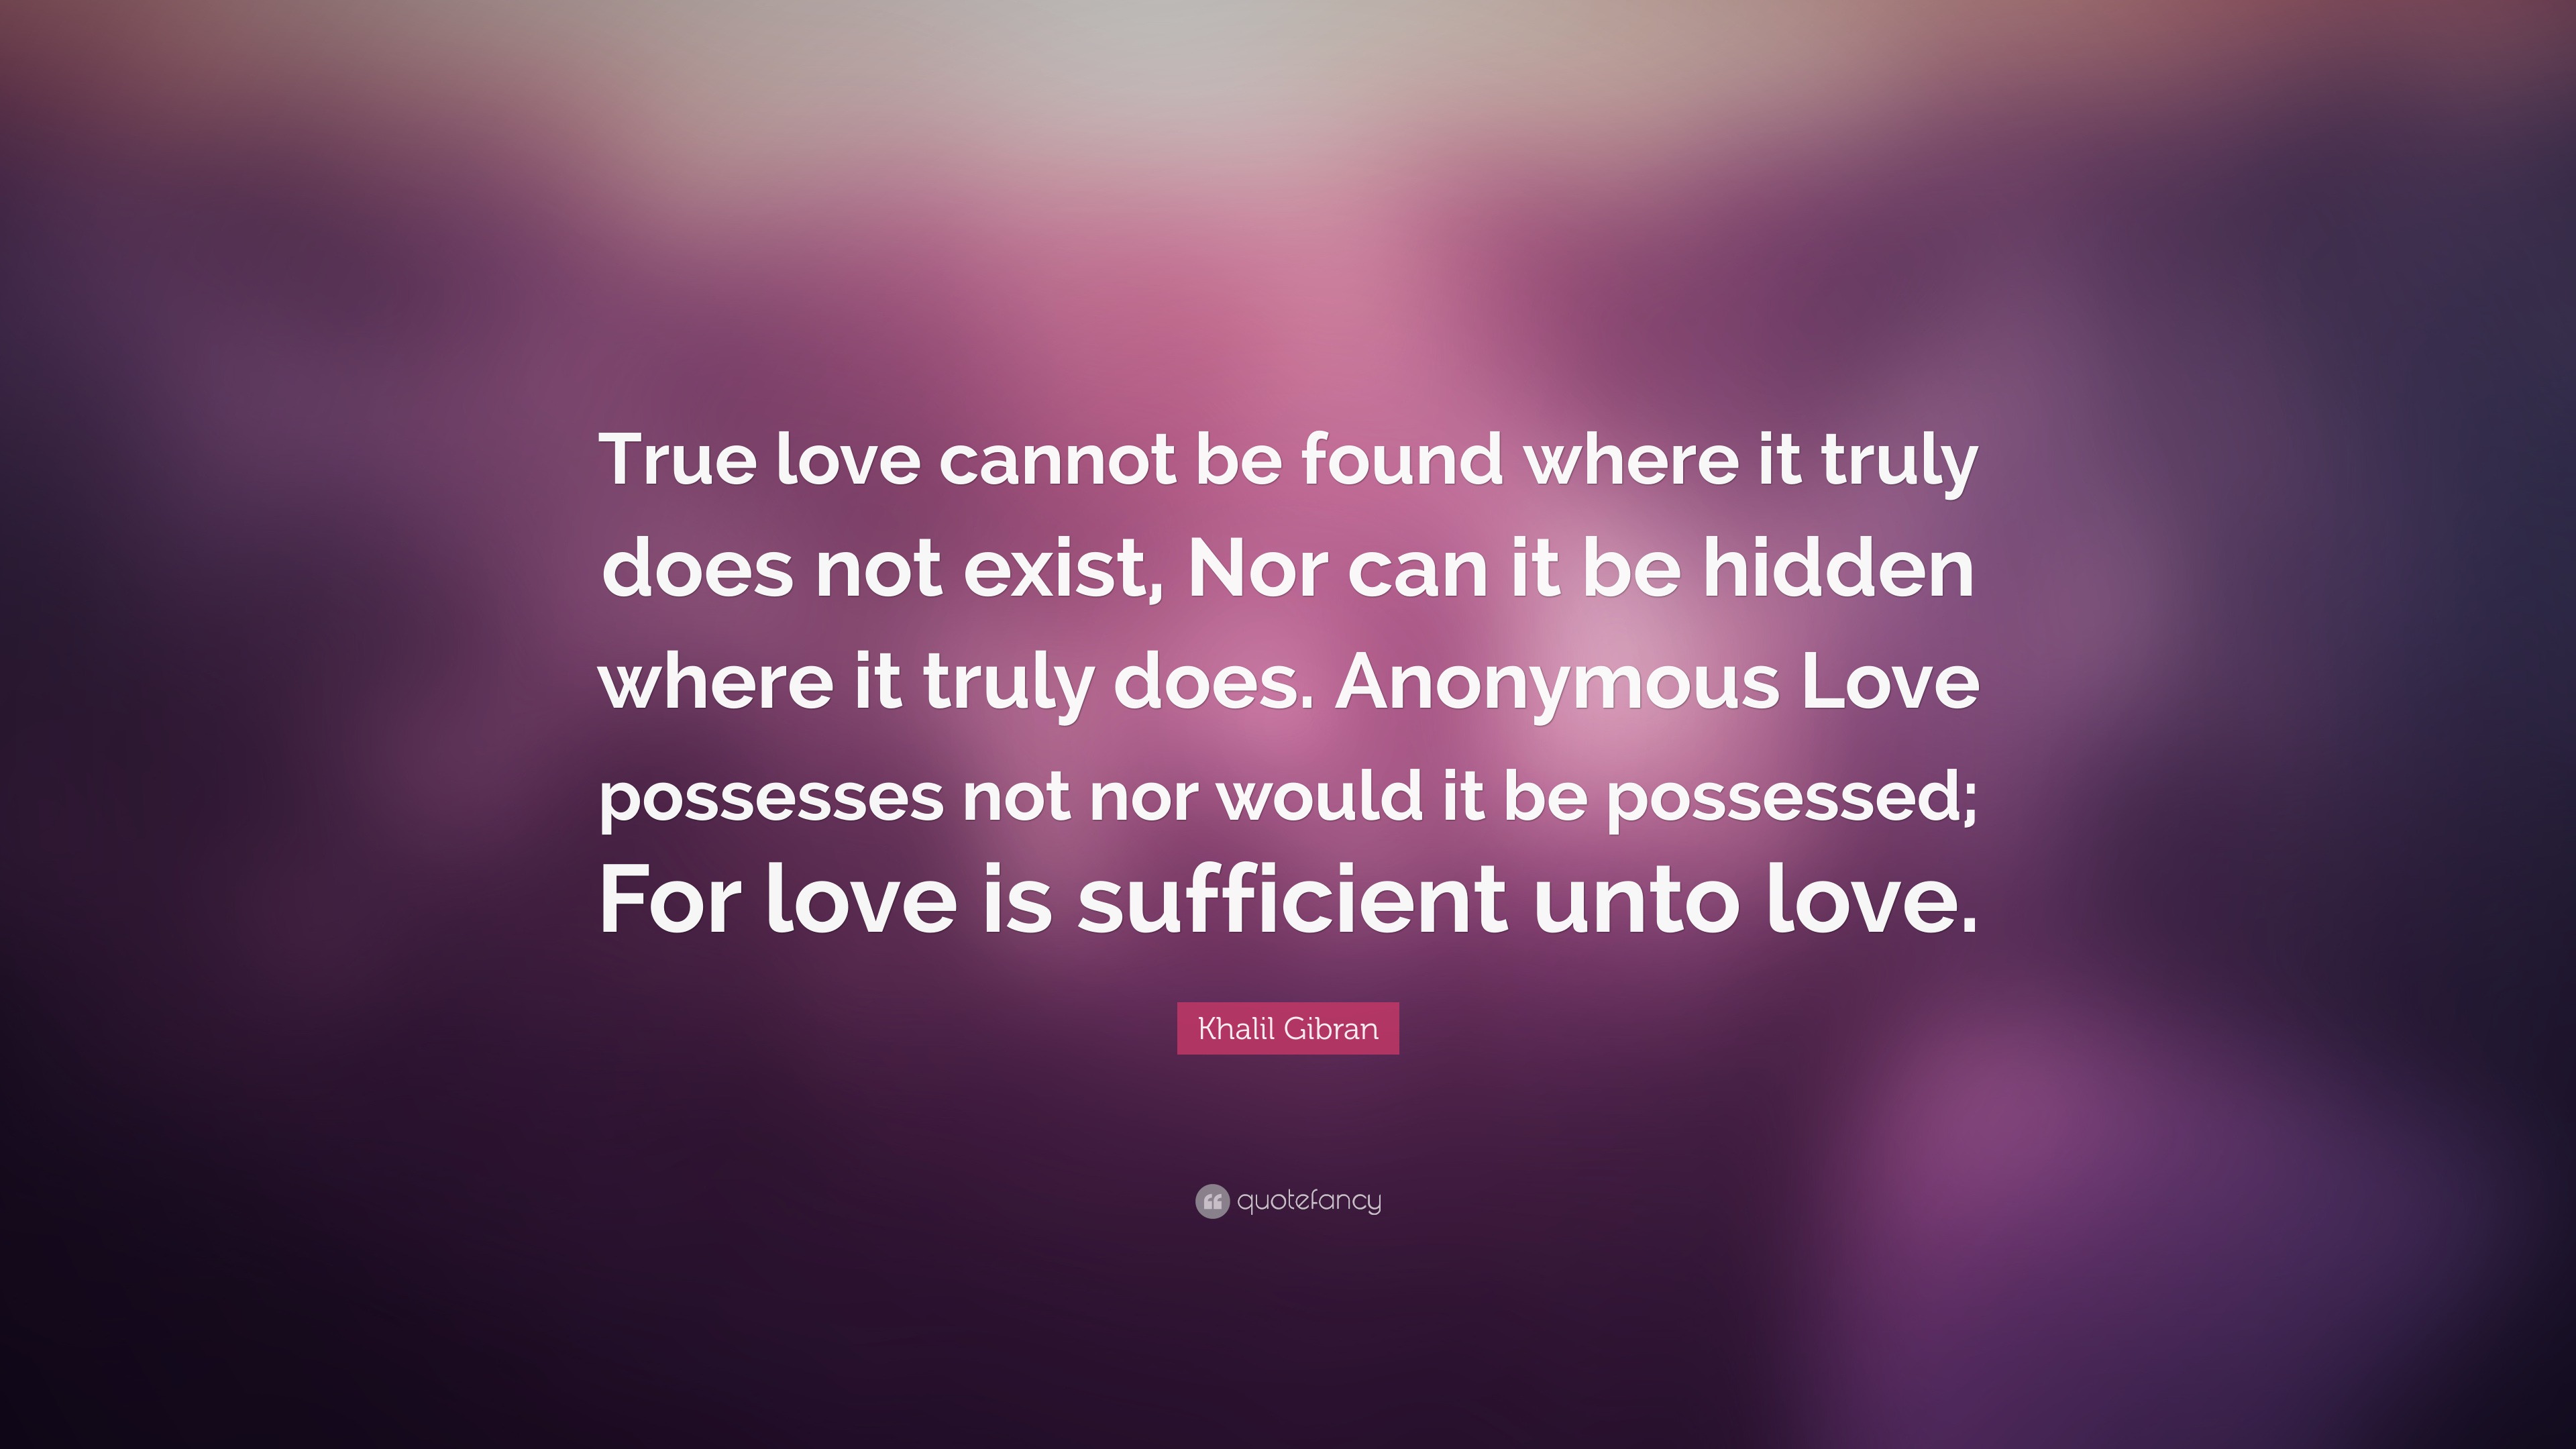 Khalil Gibran Quote “True love cannot be found where it truly does not exist